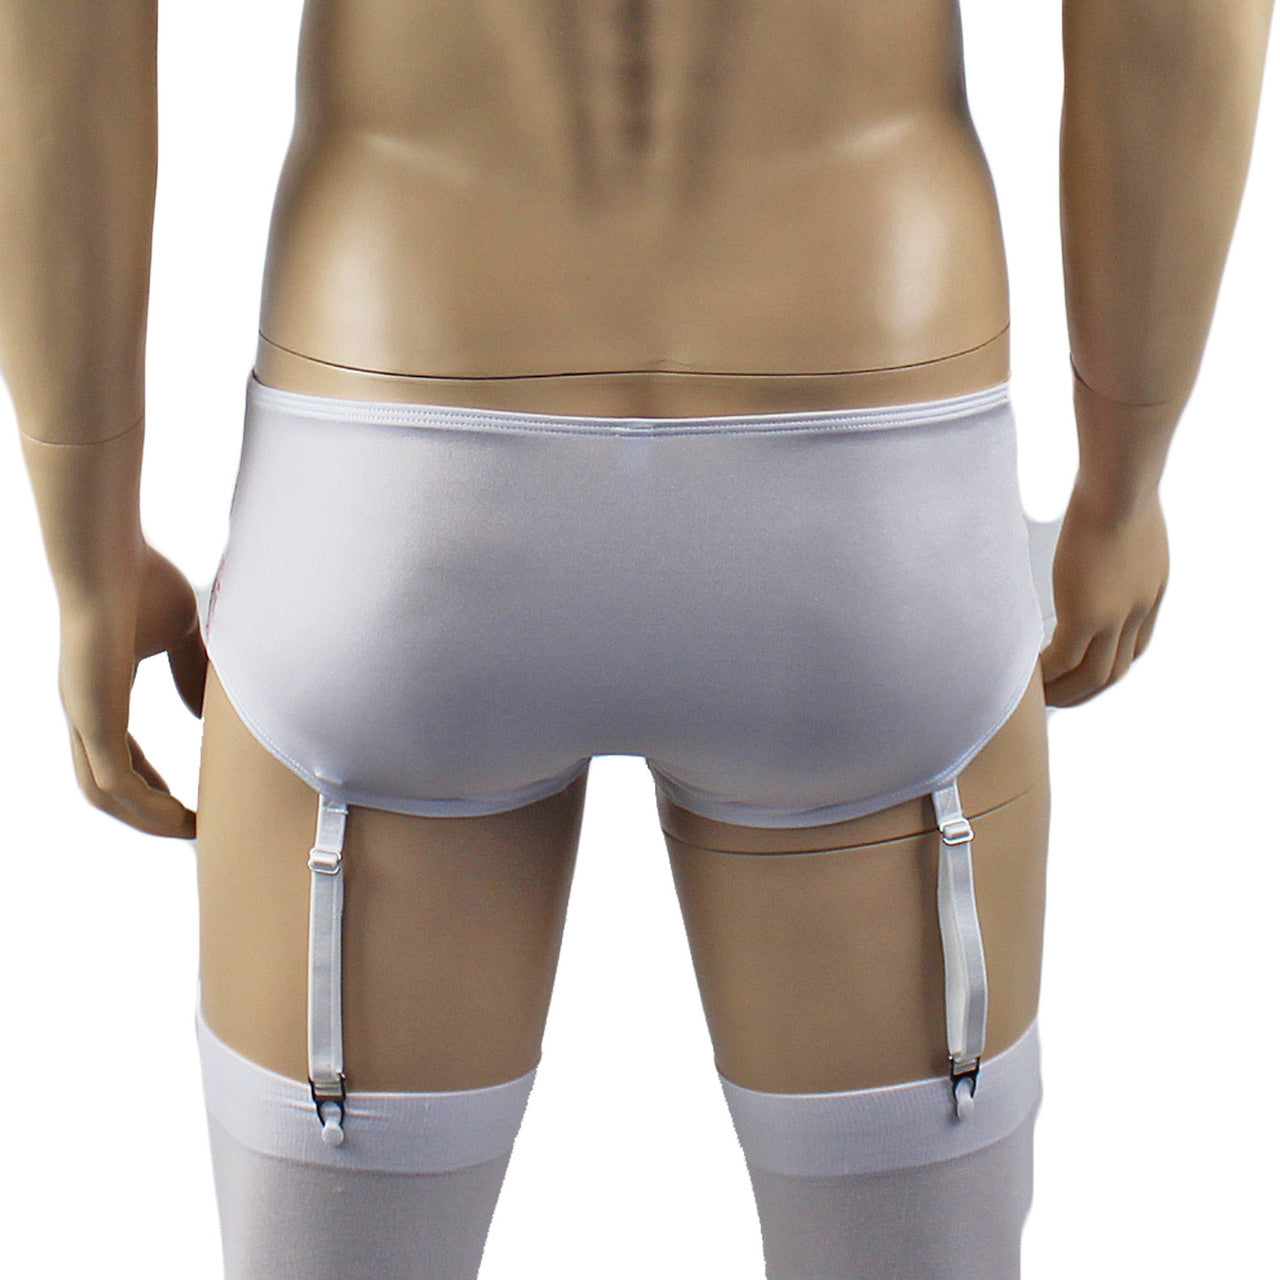 Mens Luxury Mini Bikini Brief with Detachable Garters and Stockings  (white plus other colours)